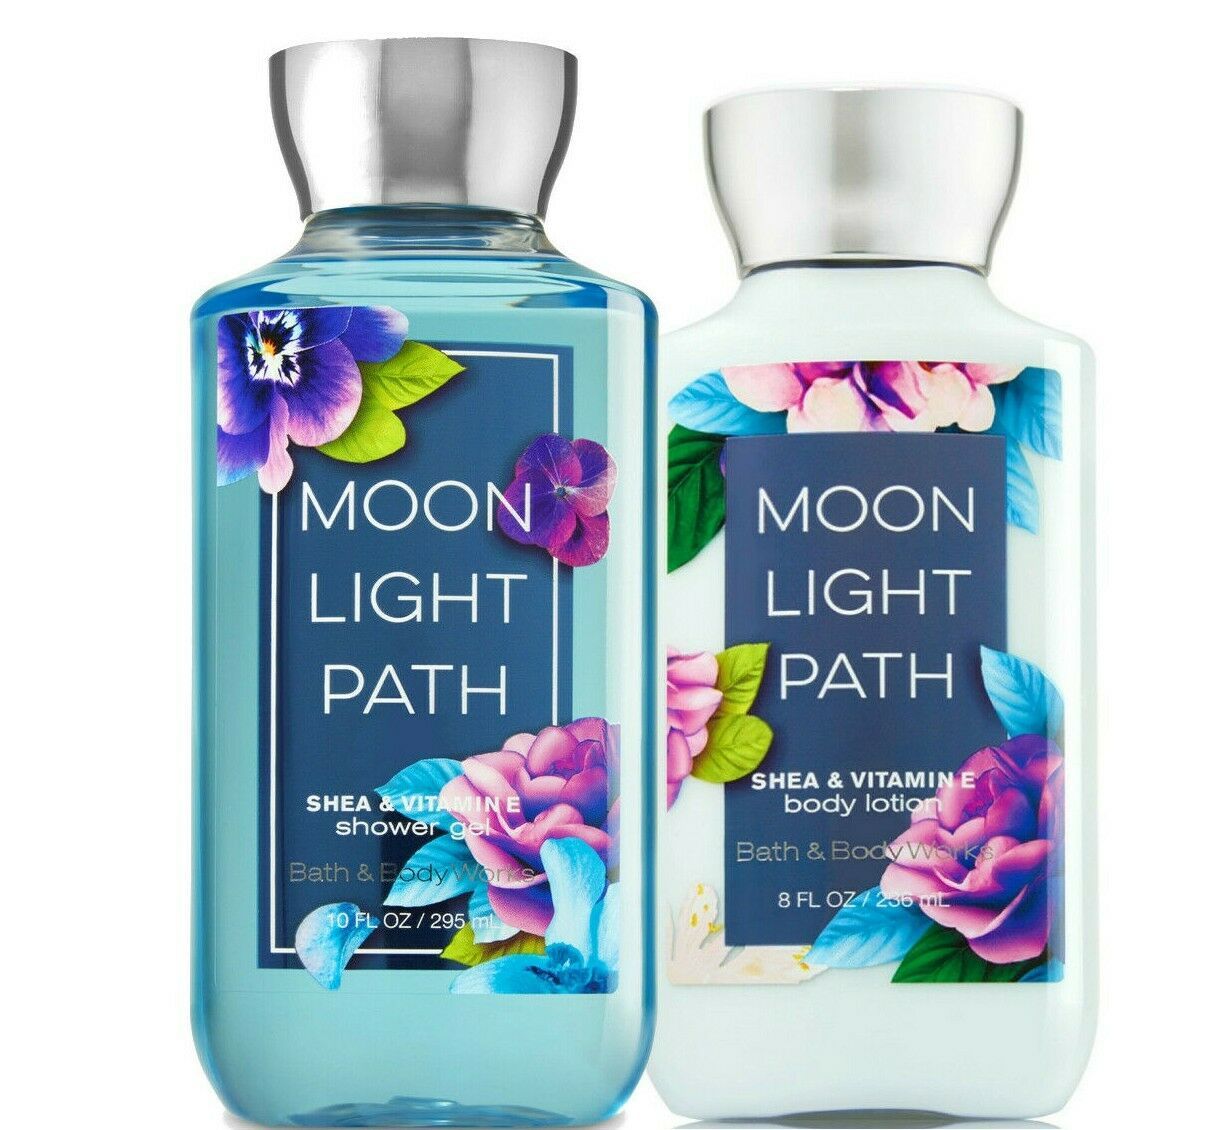 Primary image for Bath & Body Works Moonlight Path Body Lotion + Shower Gel Duo Set